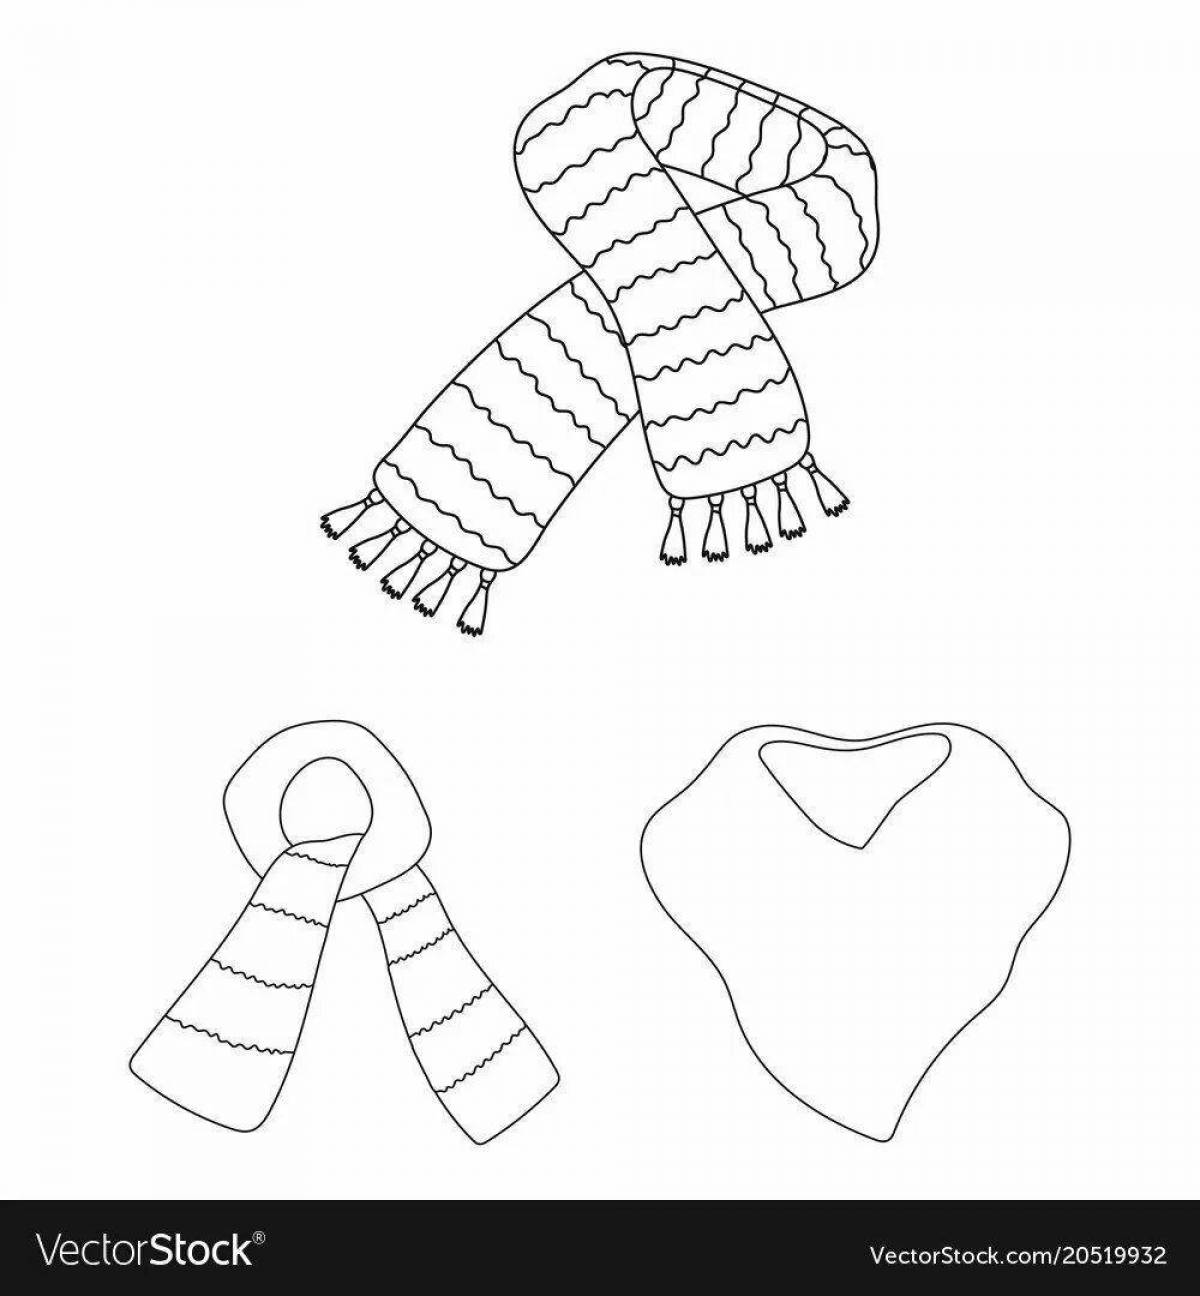 Coloring page joyful scarf for children 3-4 years old